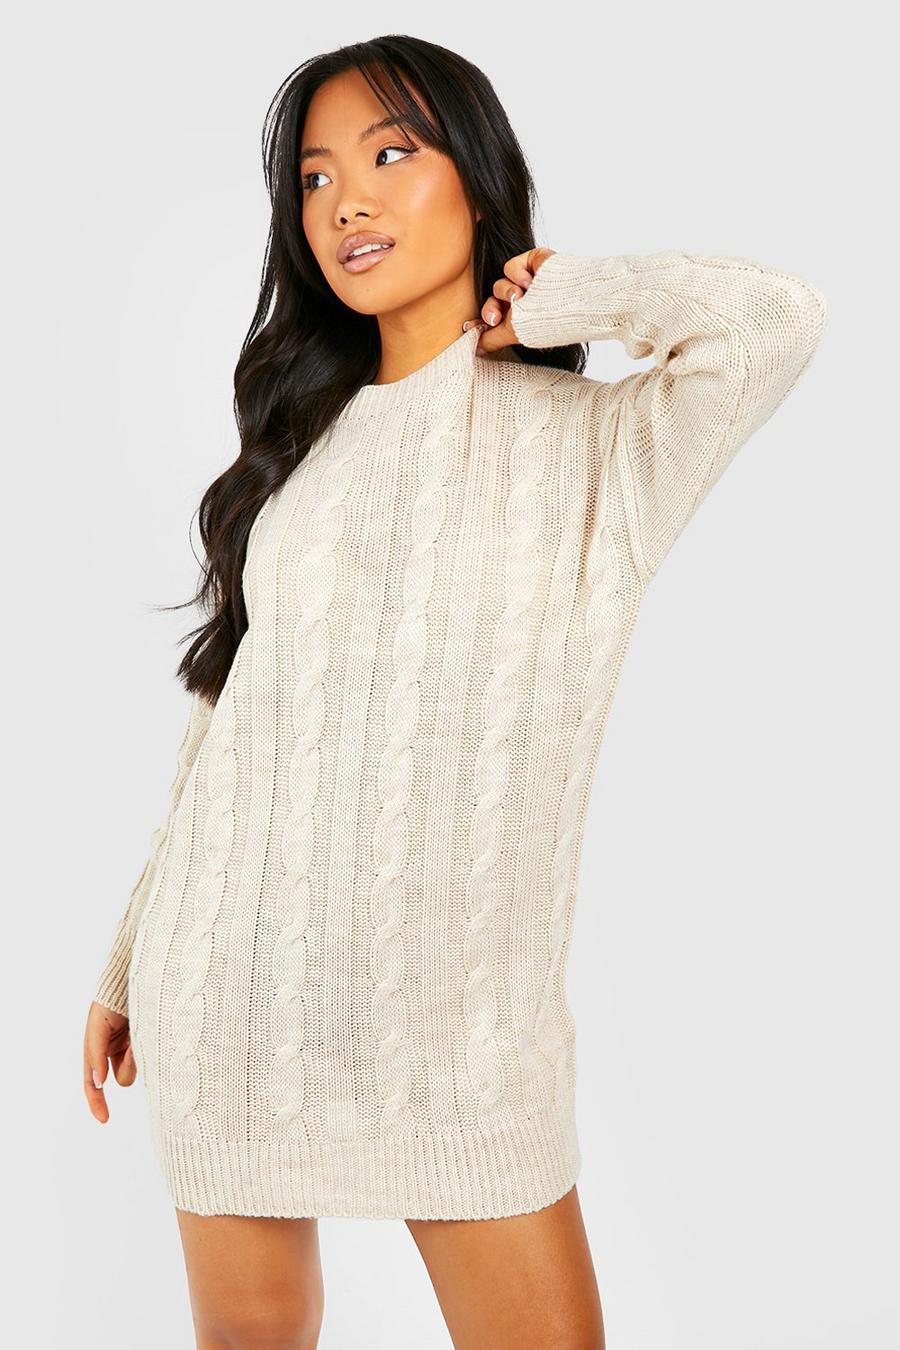 Oatmeal Petite Round Neck Cable Knit Jumper Dress